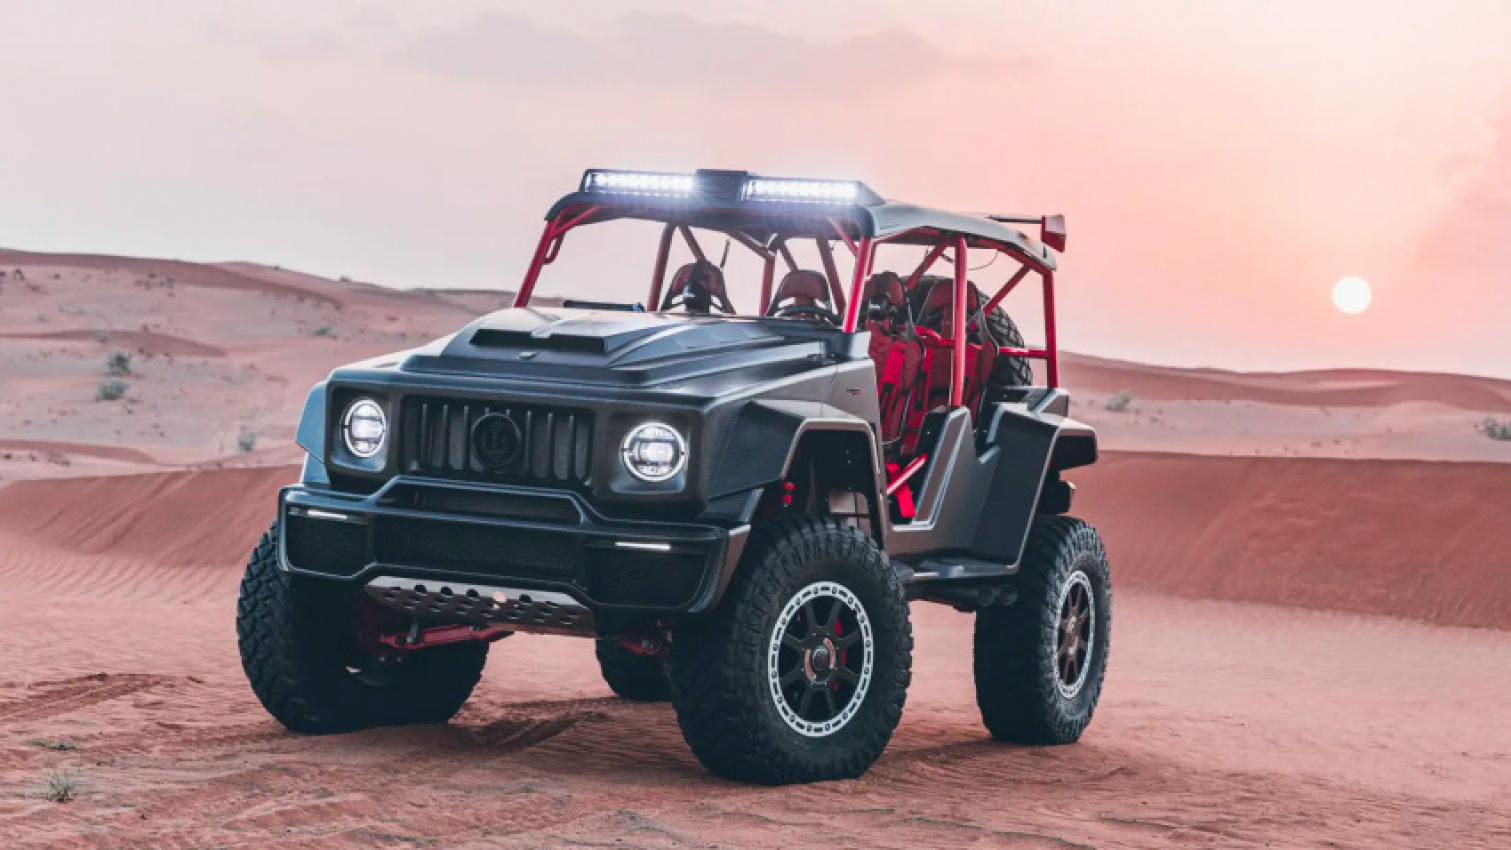 acer, autos, cars, hp, brabus, brabus 900 crawler, mercedes-amg, mercedes-benz, g what?! the brabus 900 crawler is a 900bhp desert racer with the face of a g wagen